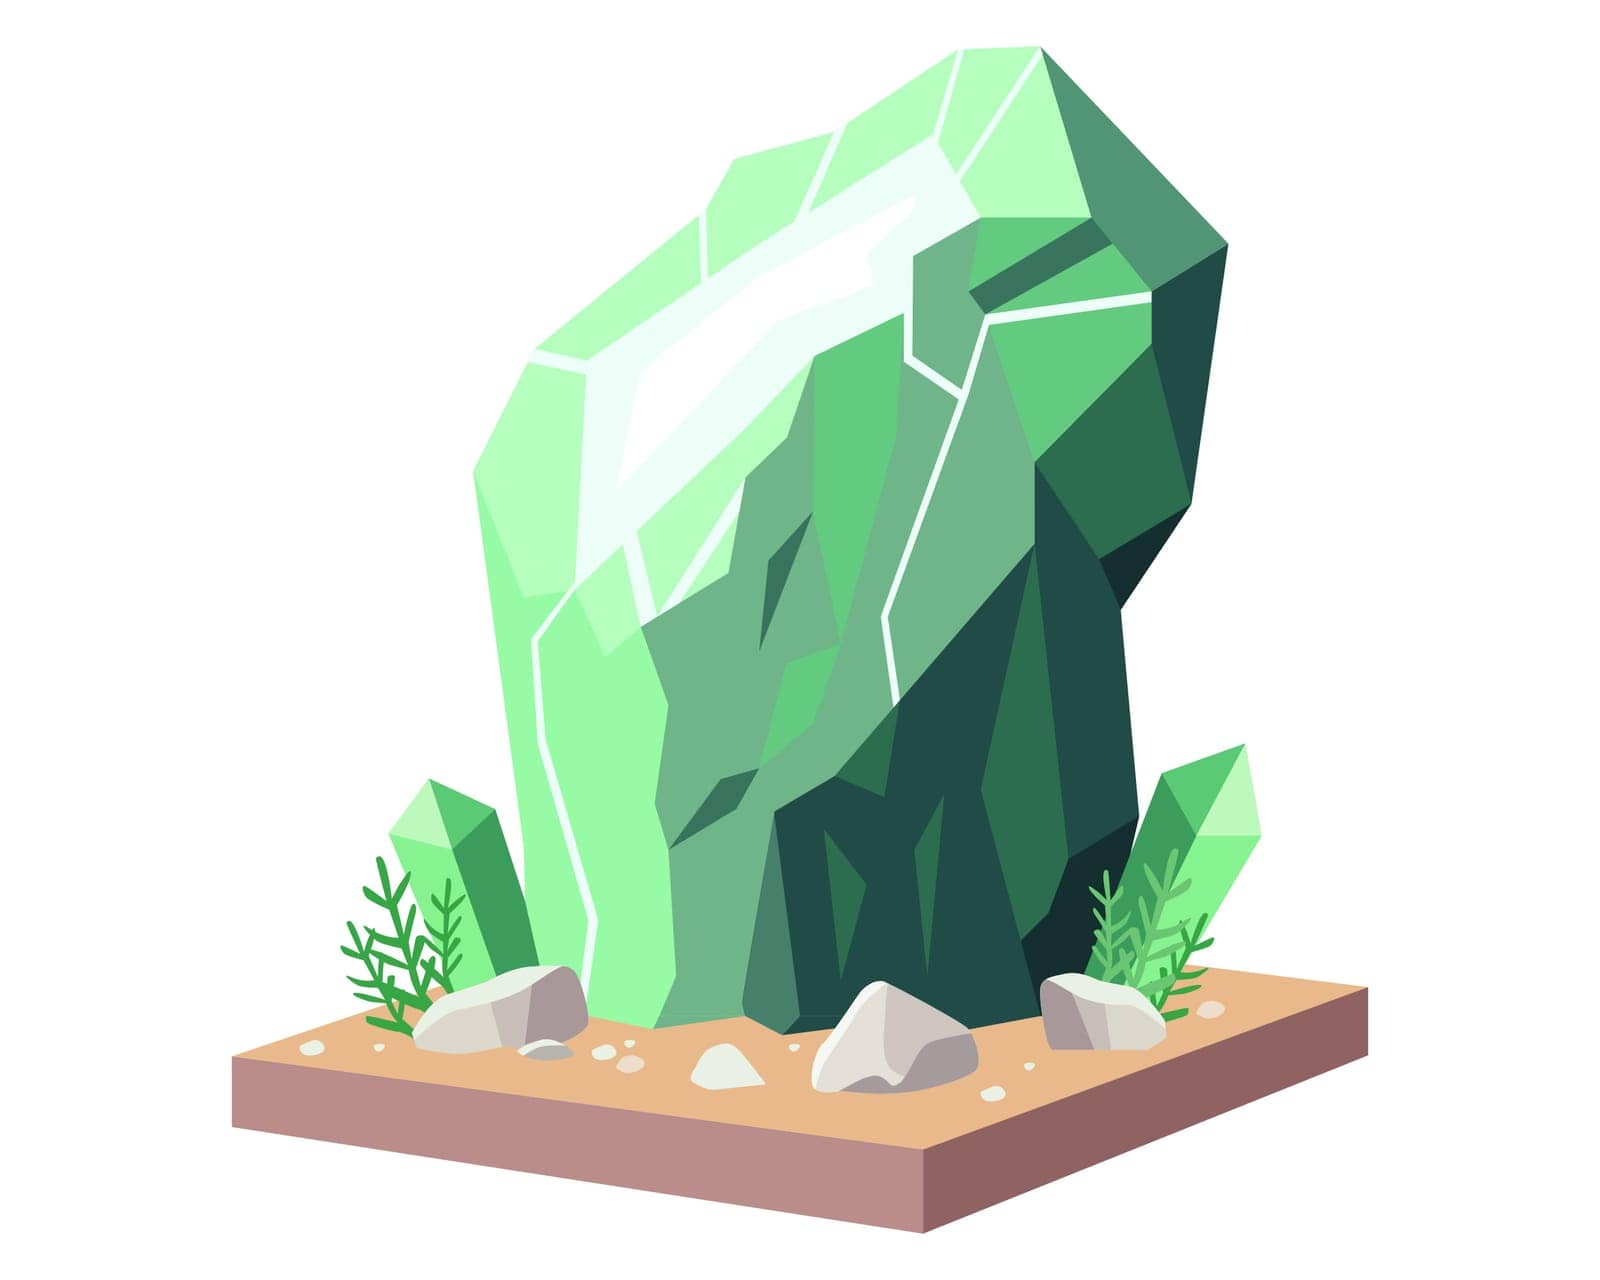 big green mineral in nature. precious gem by PlutusART